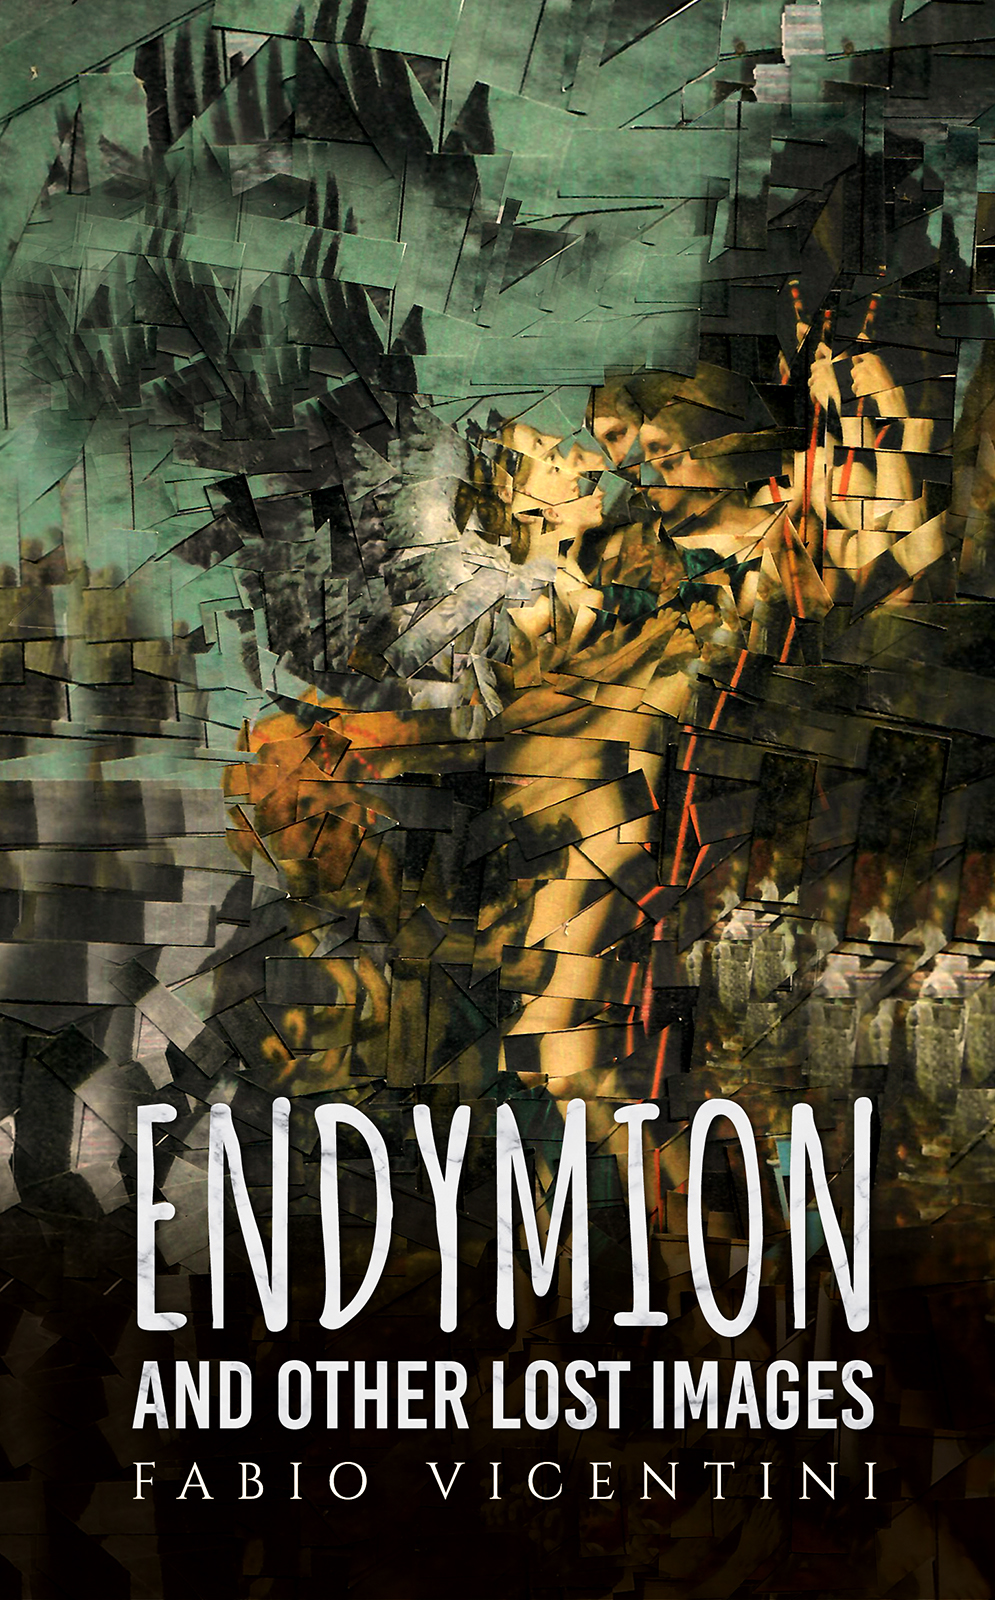 Endymion and Other Lost Images